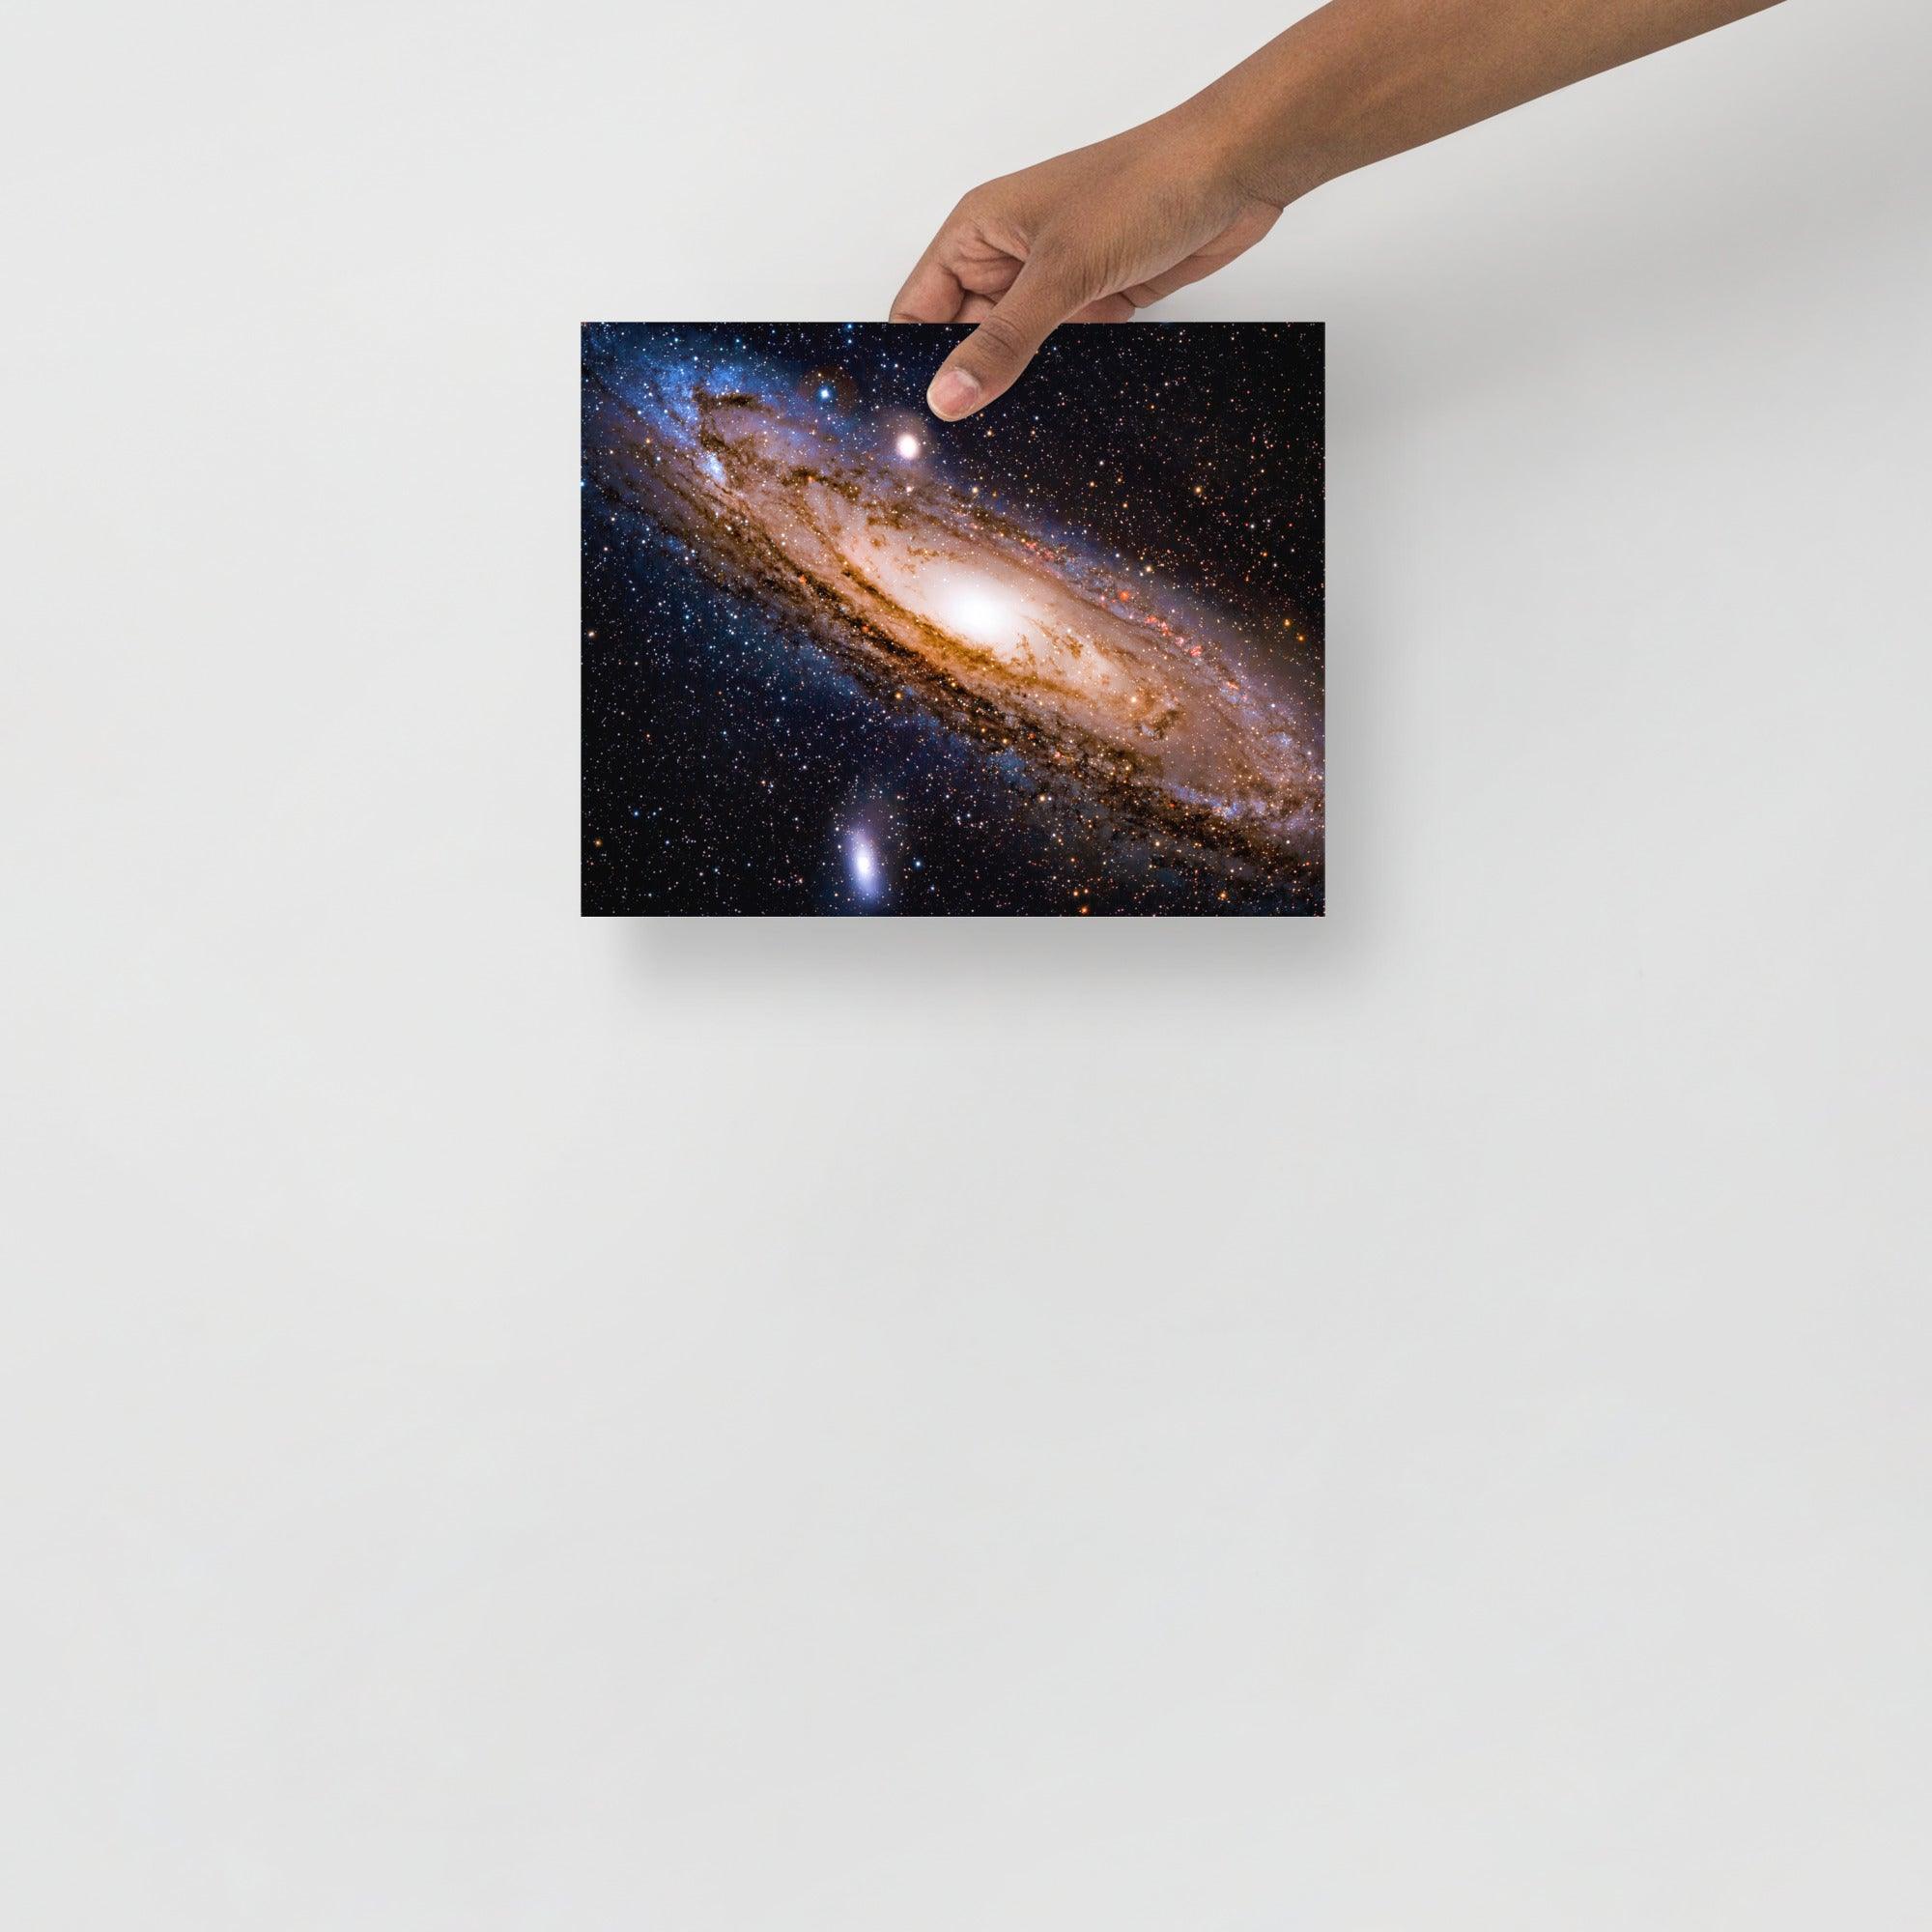 An Andromeda Galaxy poster on a plain backdrop in size 8x10”.